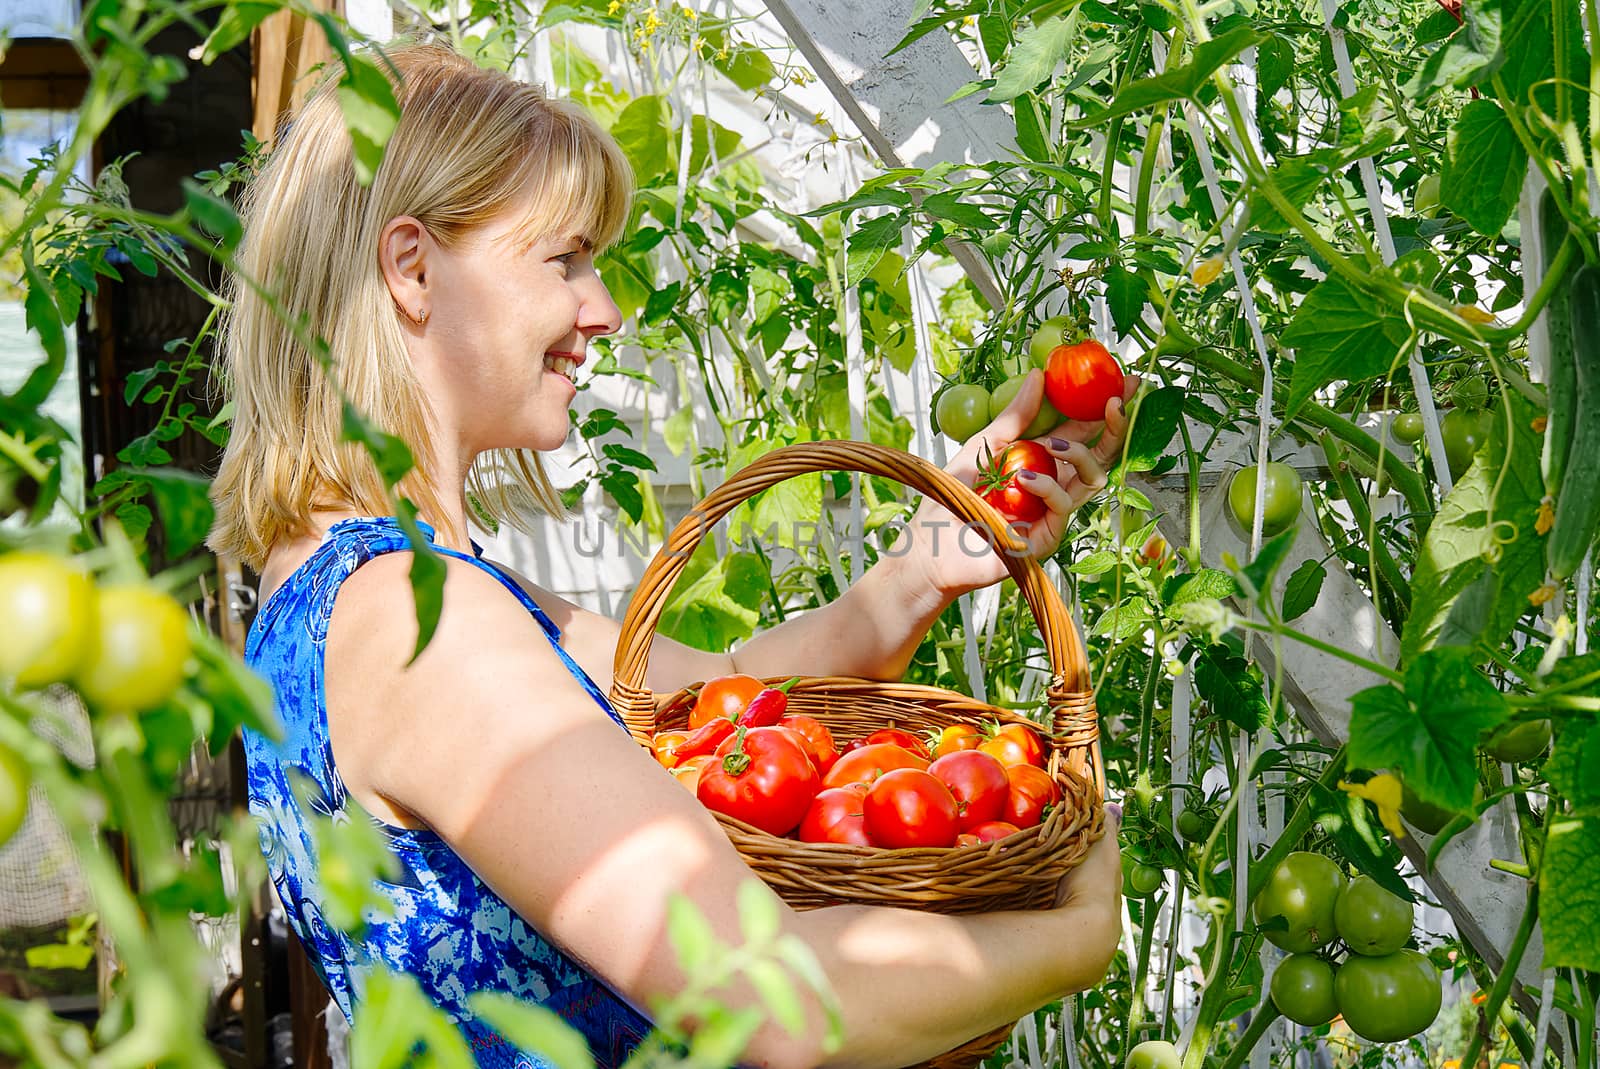 in the greenhouse smiling blond woman collects ripe red ecological tomatoes into a wicker basket. eco food home gardening concept